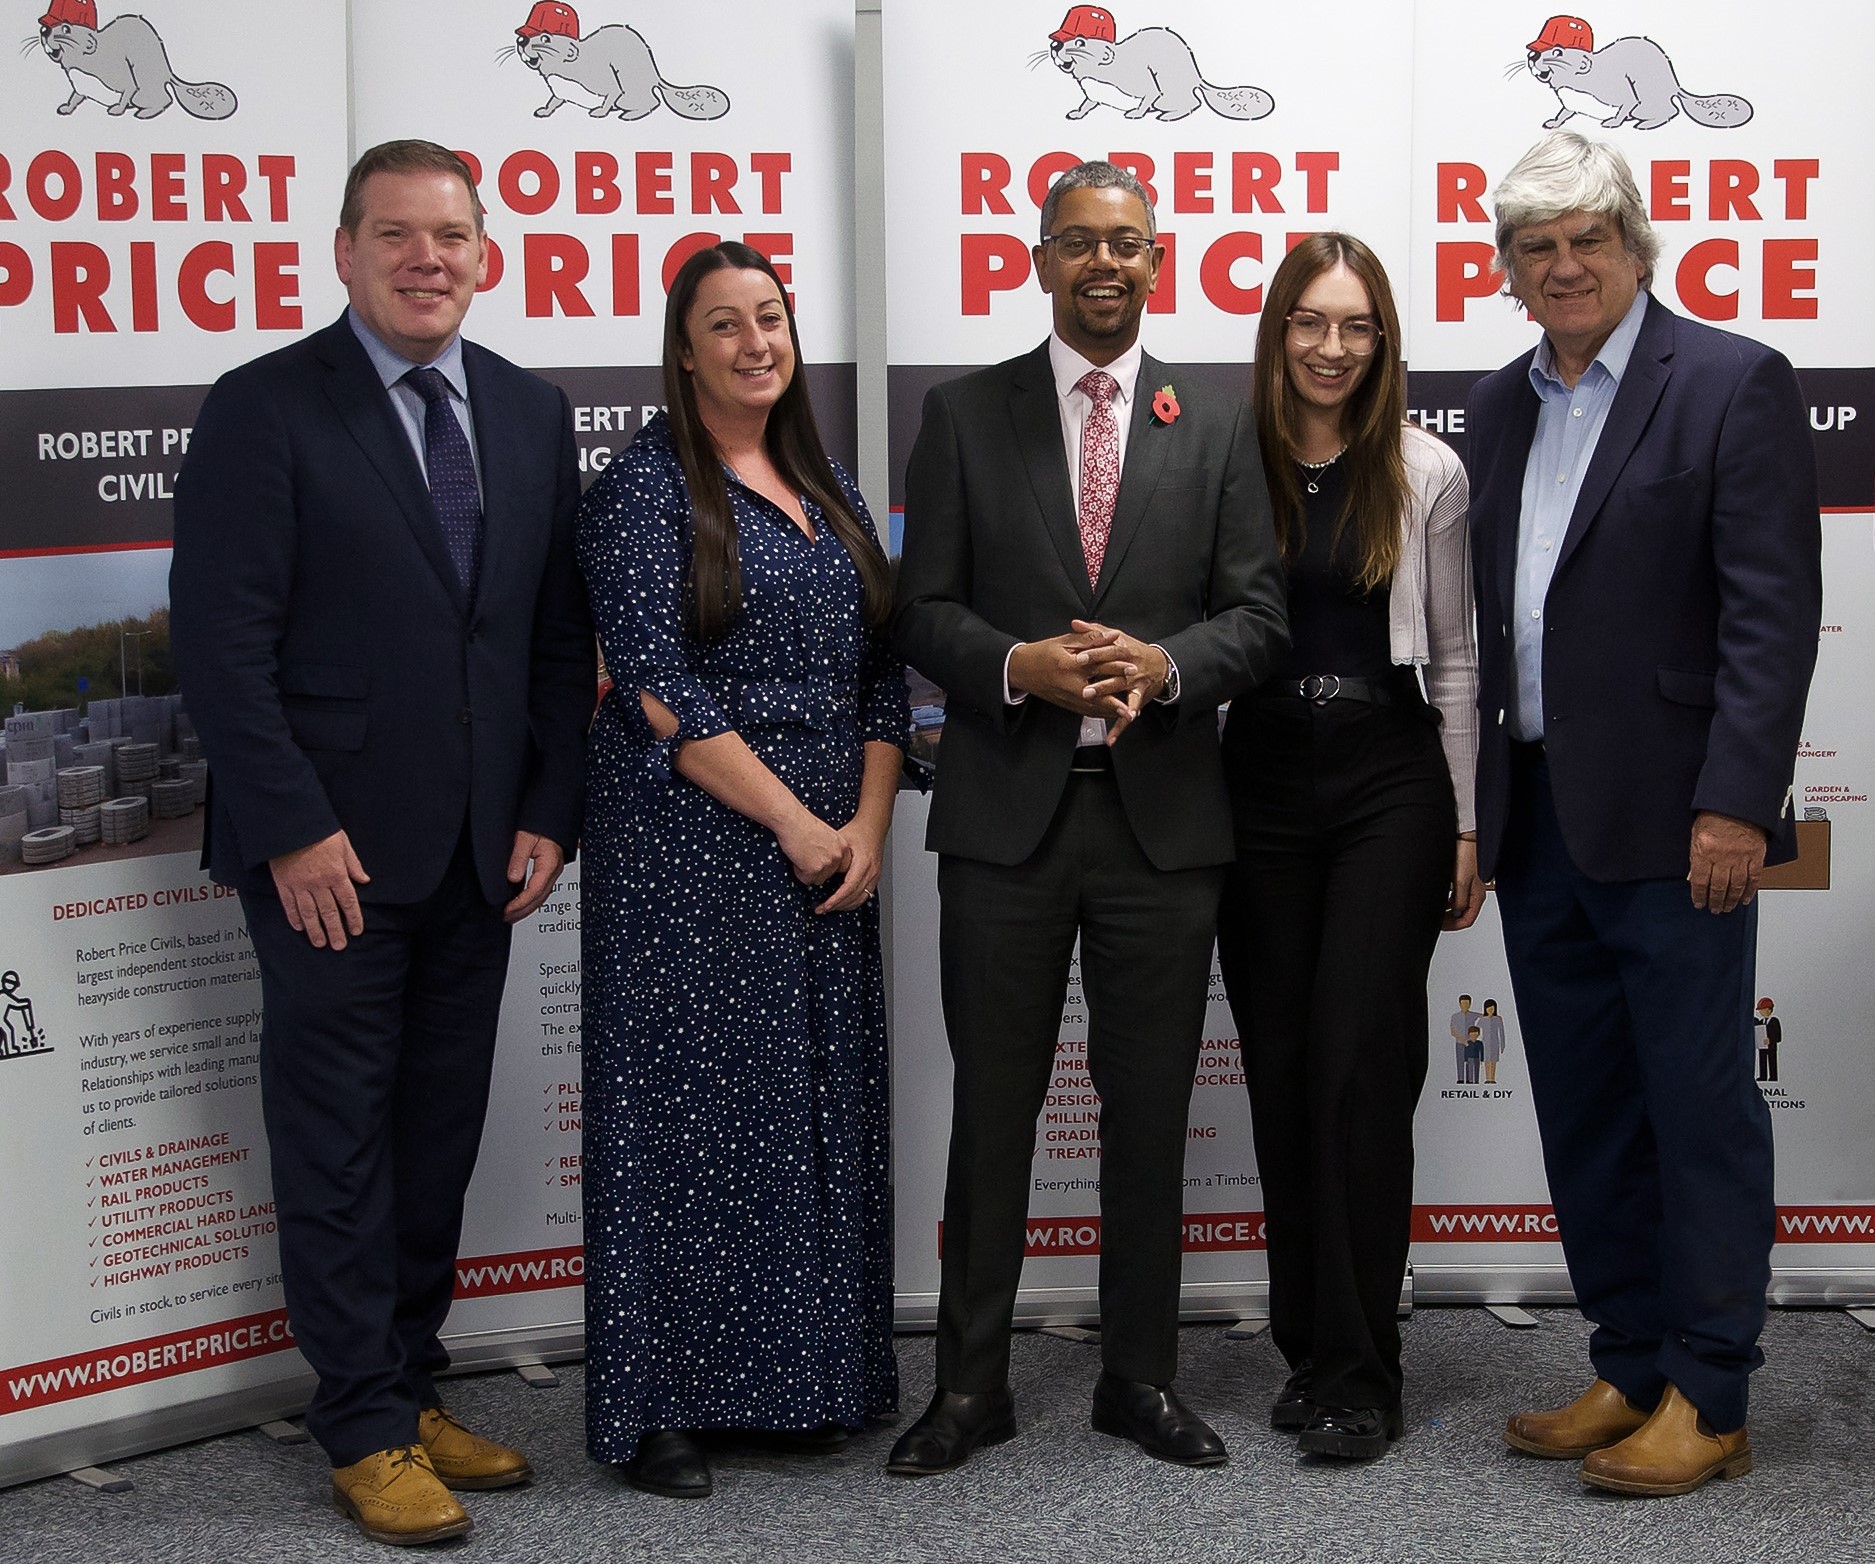 Robert Price welcomes Minister for Economy